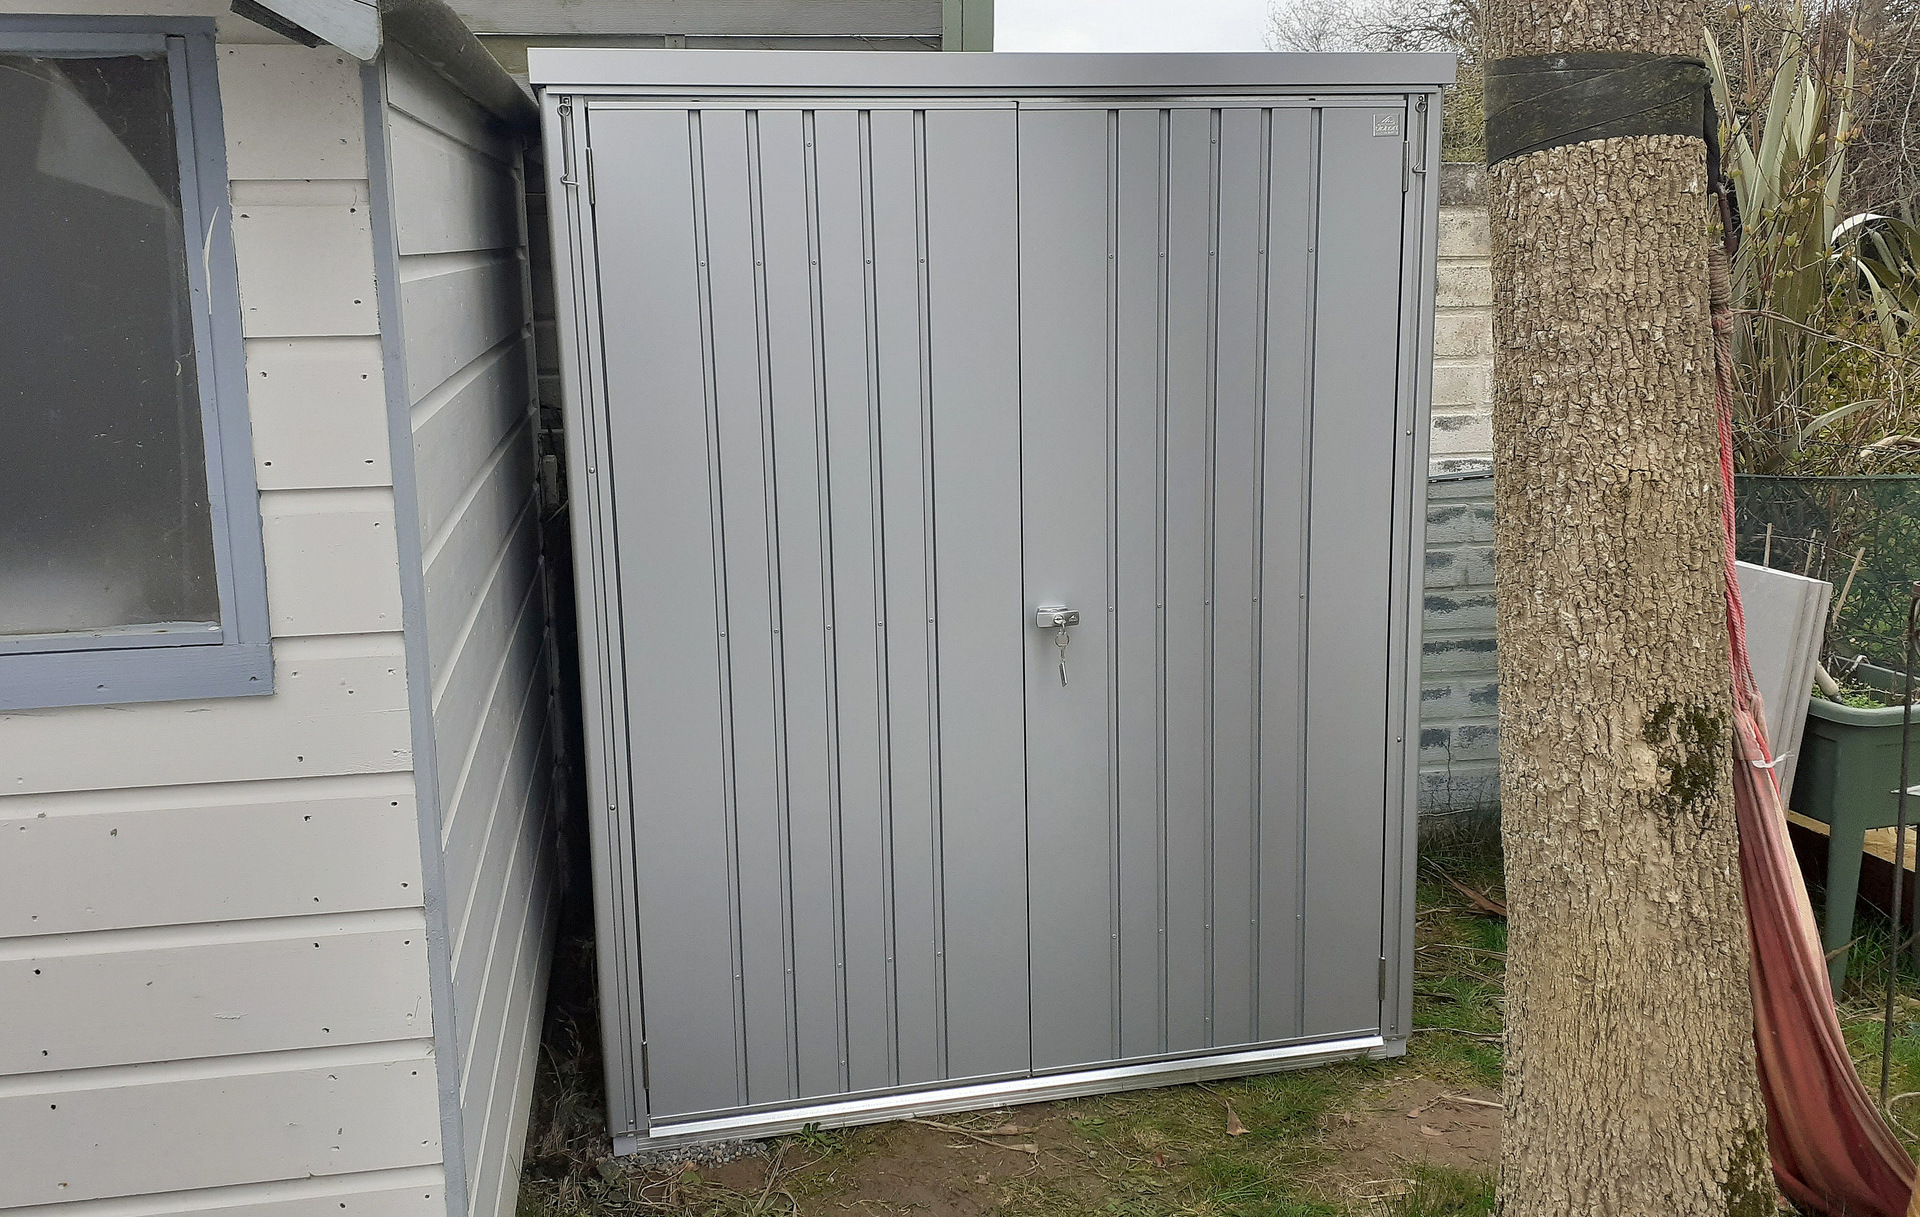 The superb quality and style of the Biohort Equipment Locker 150 in metallic silver  | supplied + installed in Gorey, Co Wexford by Owen Chubb Landscapers. Ireland's # 1 Biohort Dealer and Biohort Certified Installation Partner. Tel 087-2306 128.